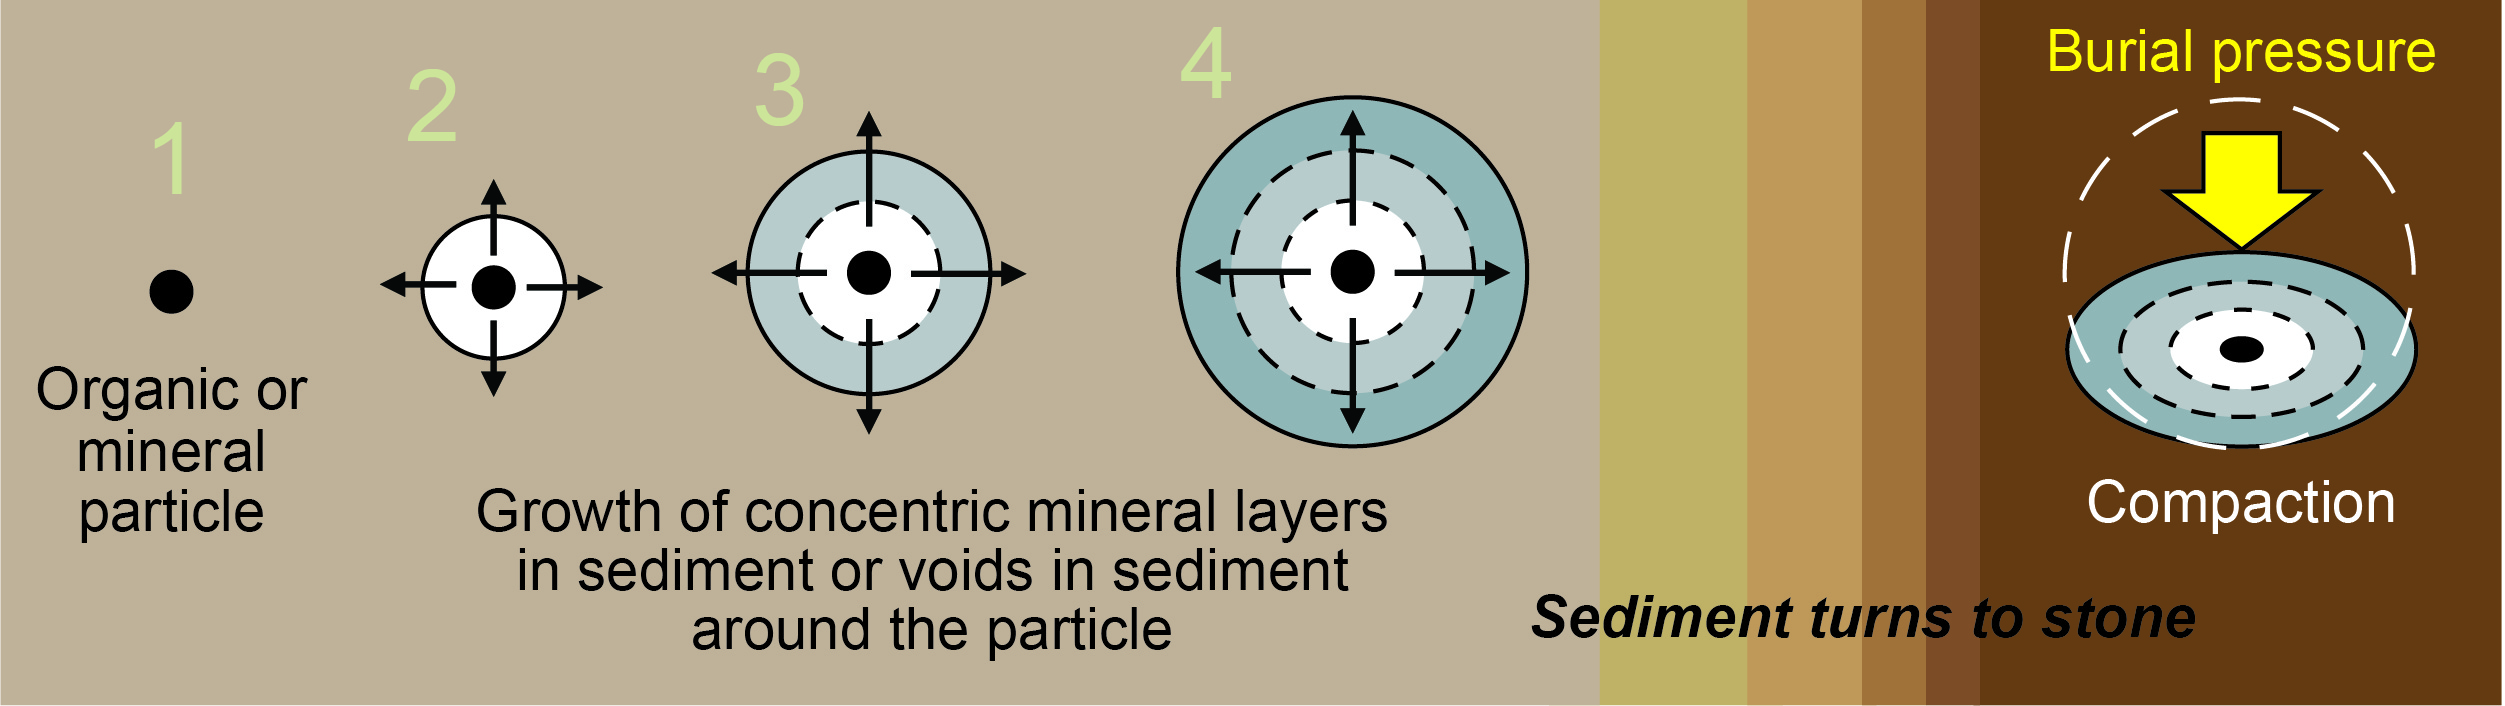 Concretions form through growth of mineral layers around a particle.